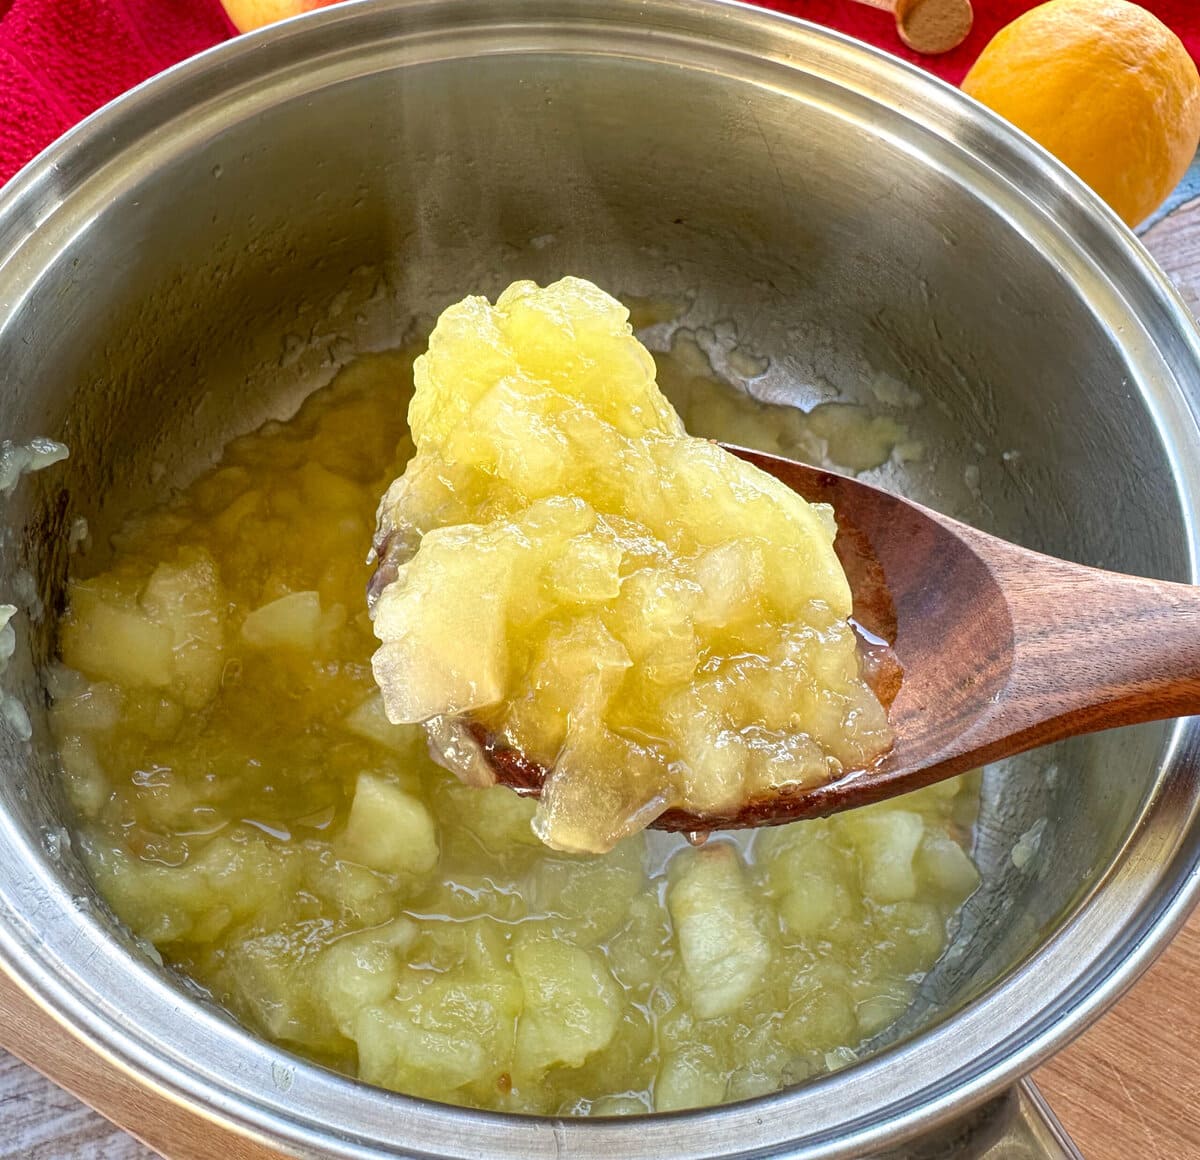 A wooden spoon holding up stewed apples to show the desired consistency